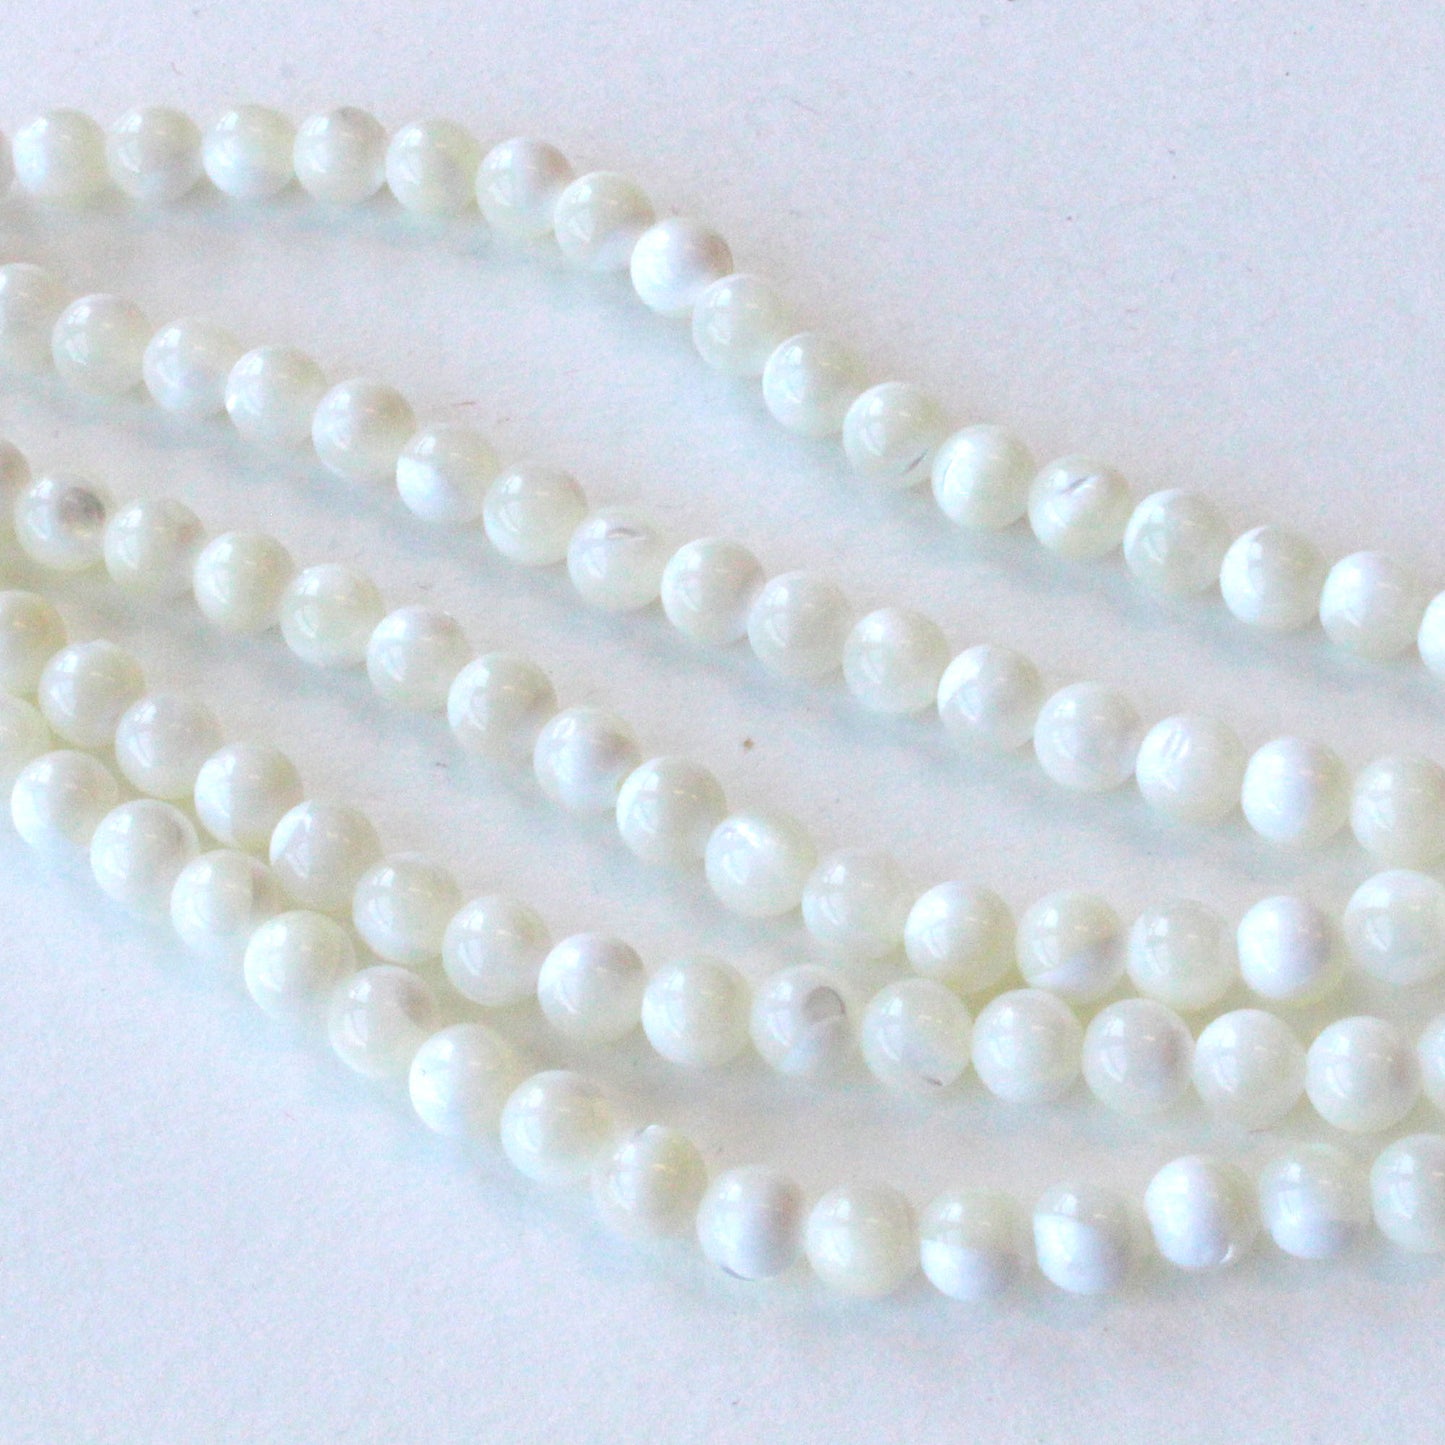 6mm Round Mother of Pearl - 16 inches